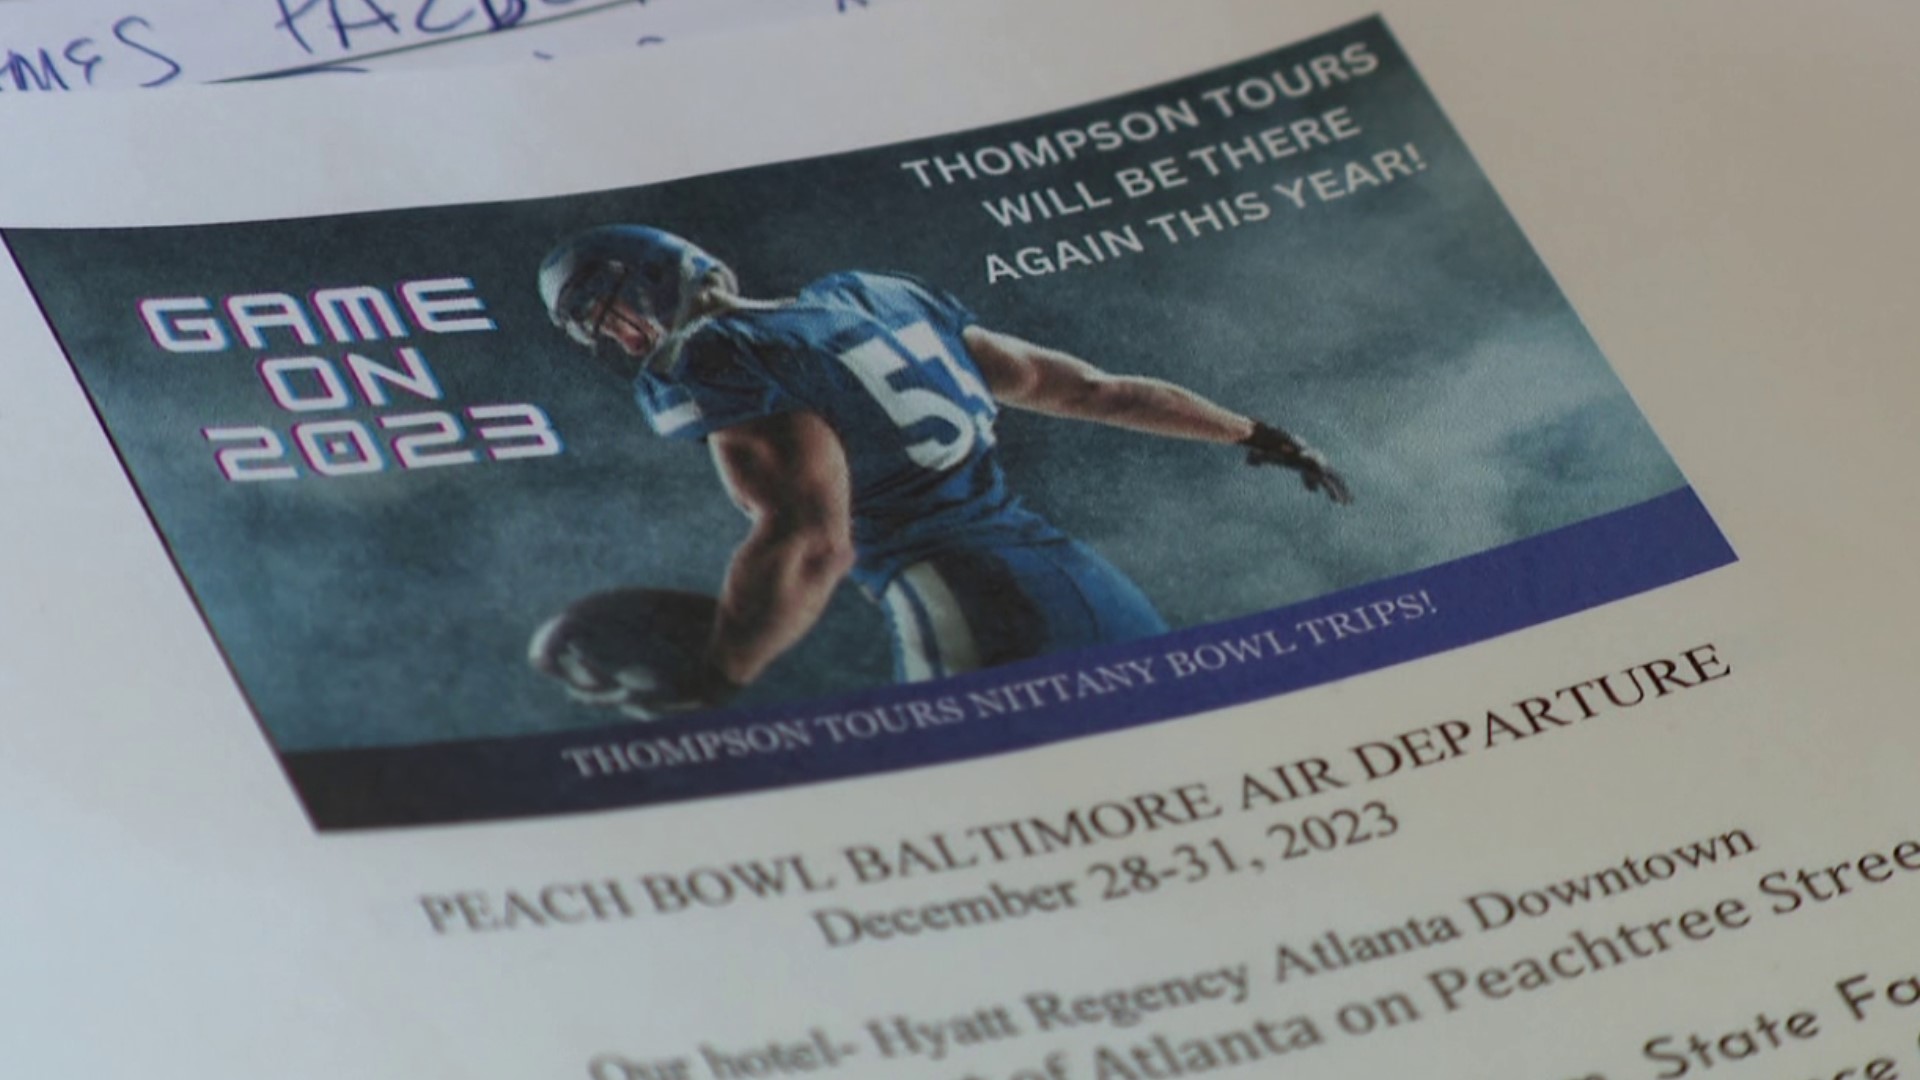 Travel agents are booking travel plans now for the big game on December 30th.